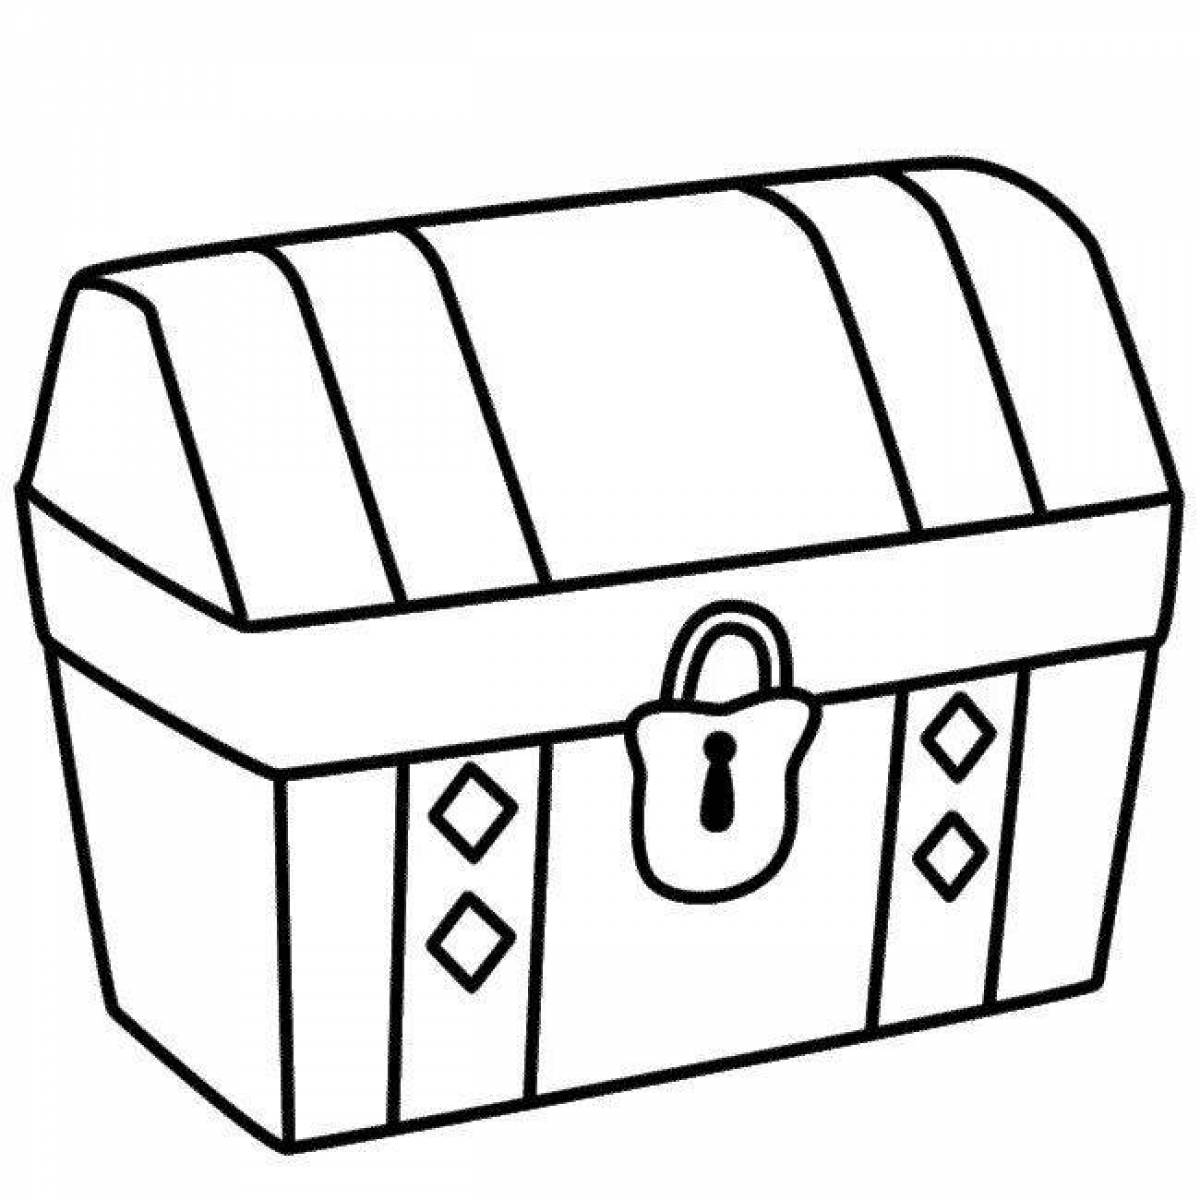 Glamor chest coloring page